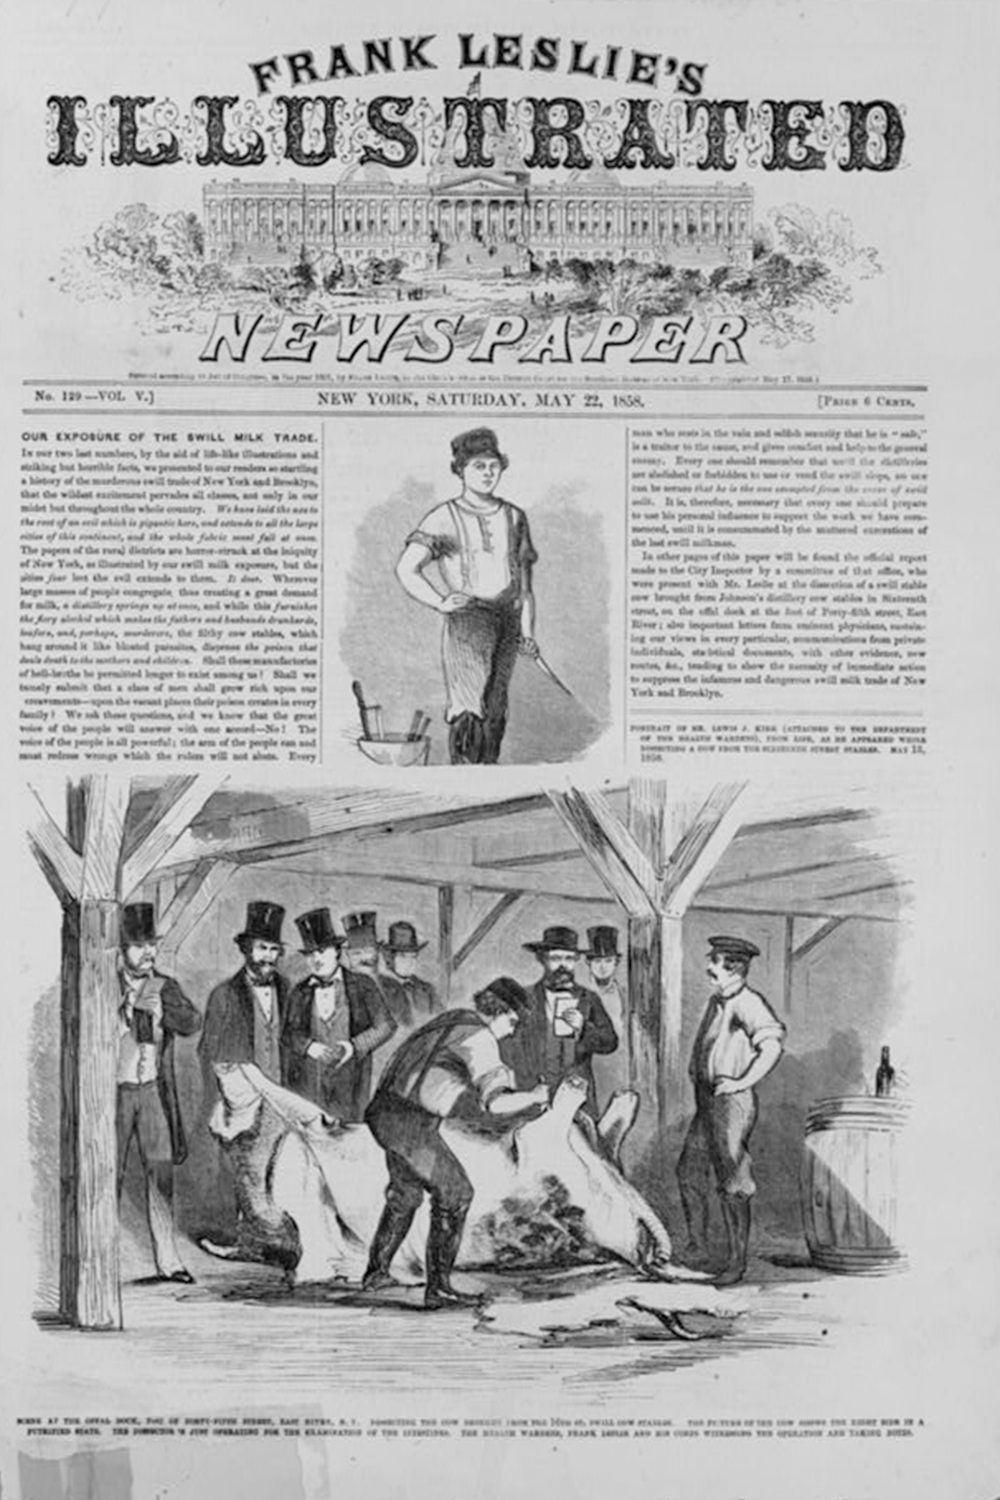 This image is of a newspaper page featuring men in top hats standing around a dead cow. There is a printed article above the image.